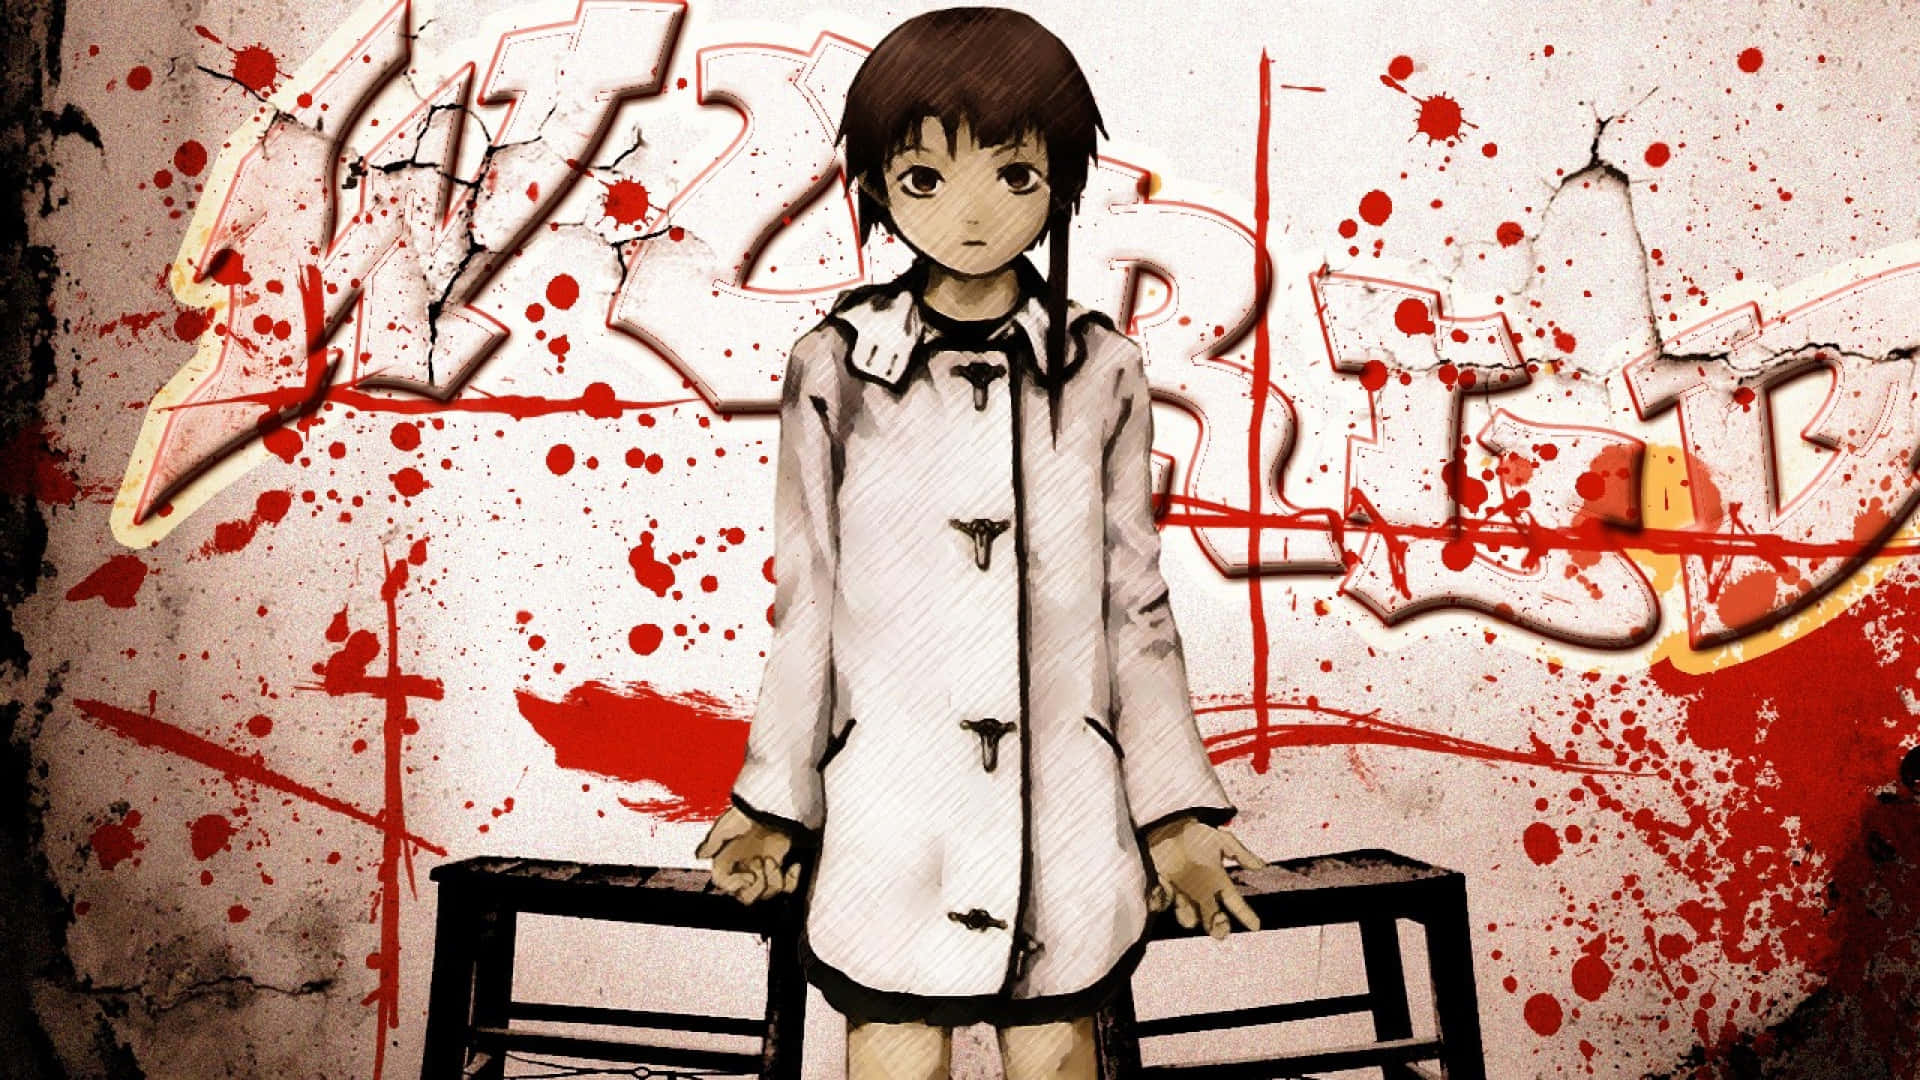 Serial Experiments Lain: 10 Things That Make It A Must-Watch Horror-Anime